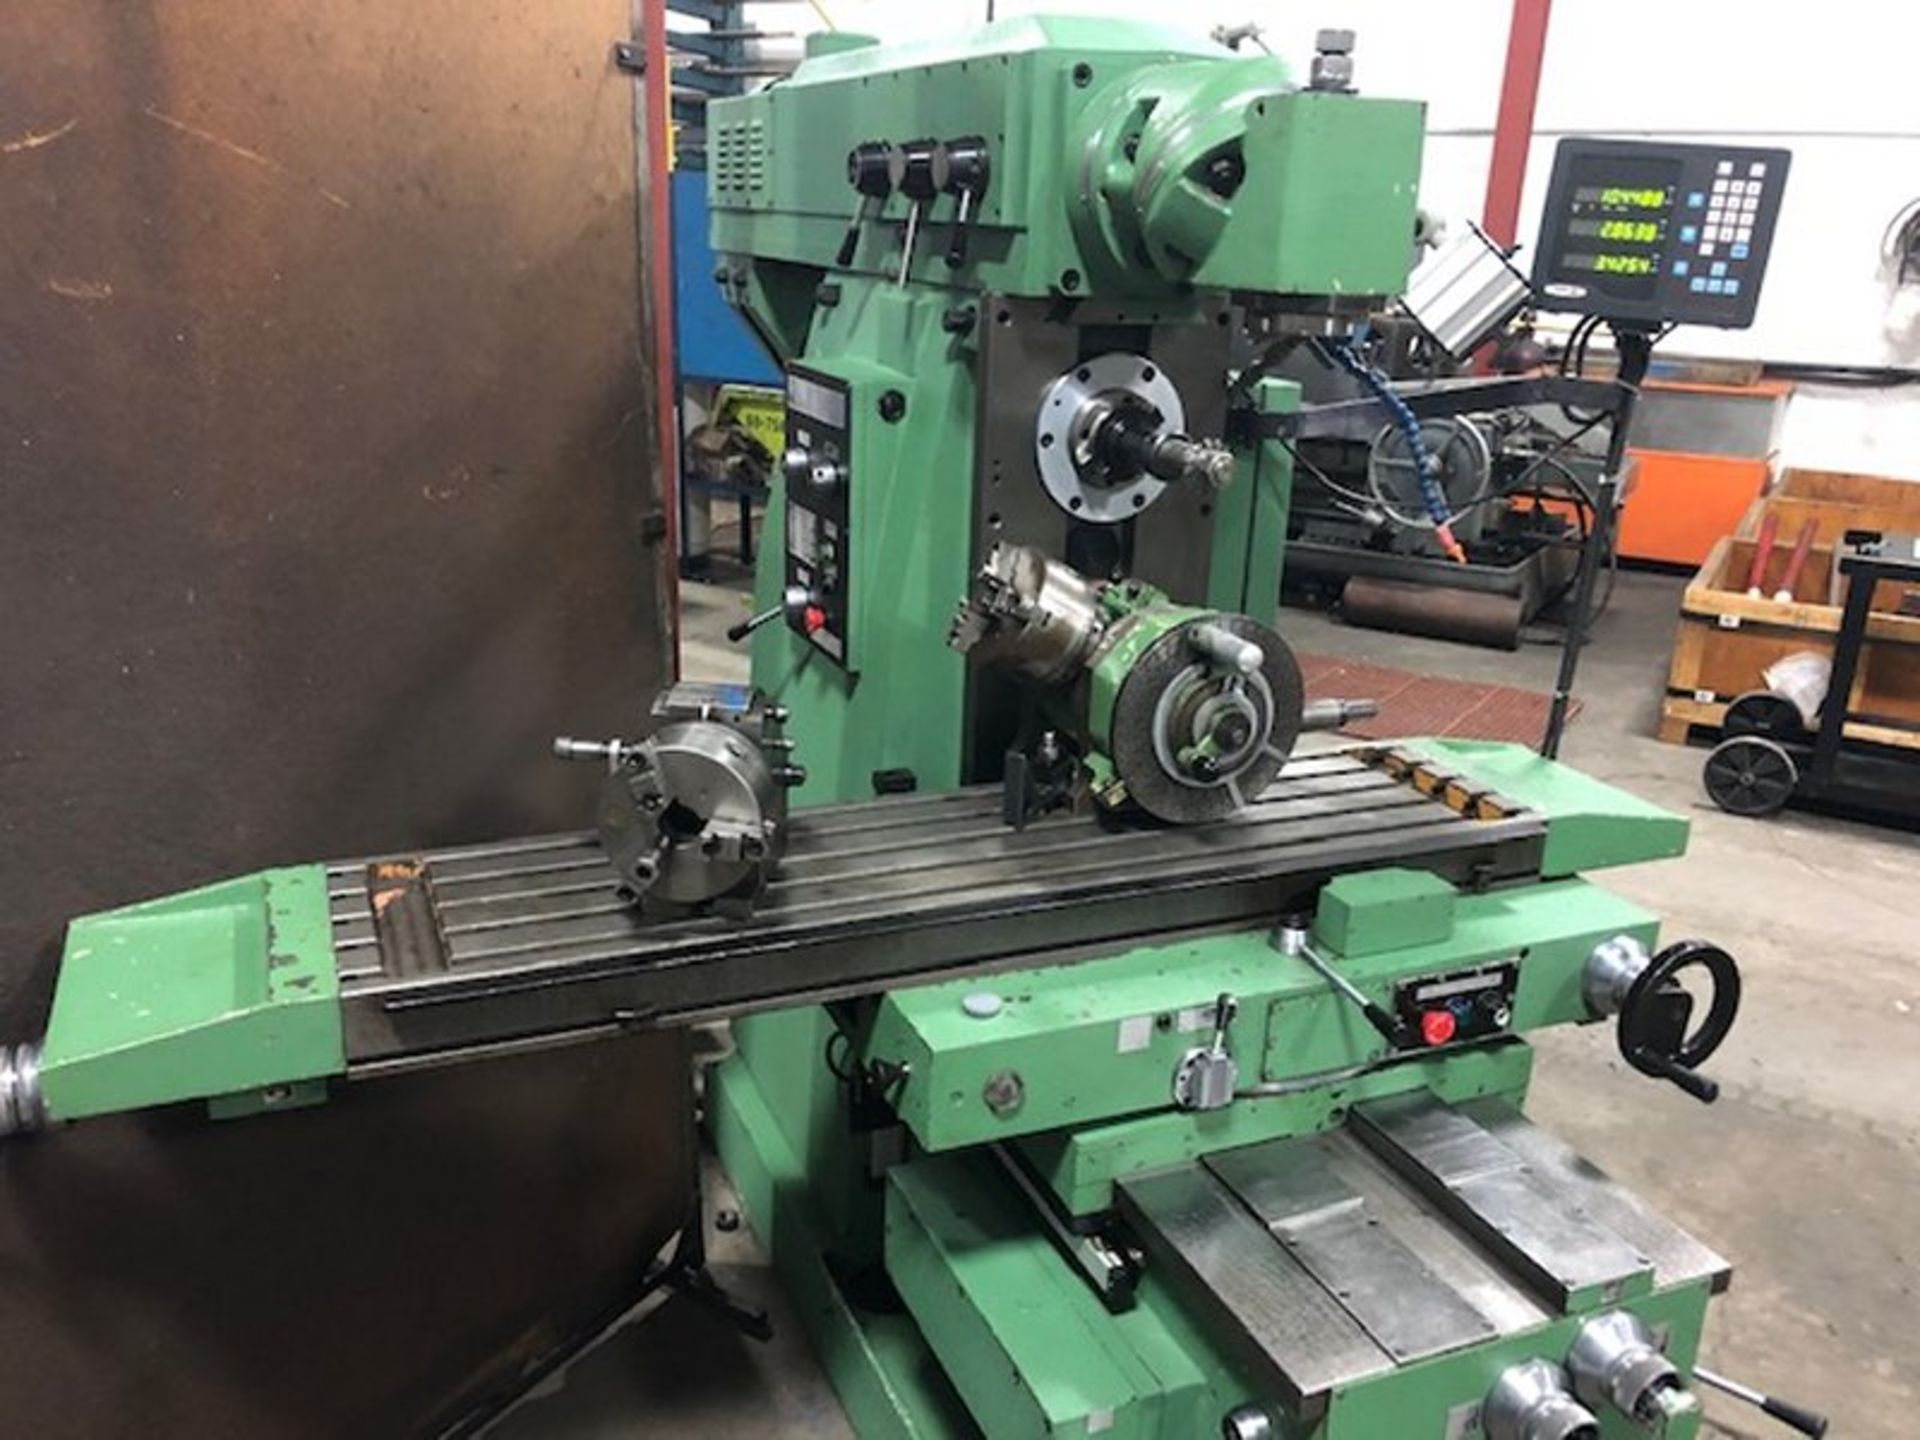 ARSENNAL FUV321M HORIZONTAL MILLING MACHINE, 12IN X 56IN BED FAGOR 3 AXIS DIGITAL READOUT - Image 6 of 7